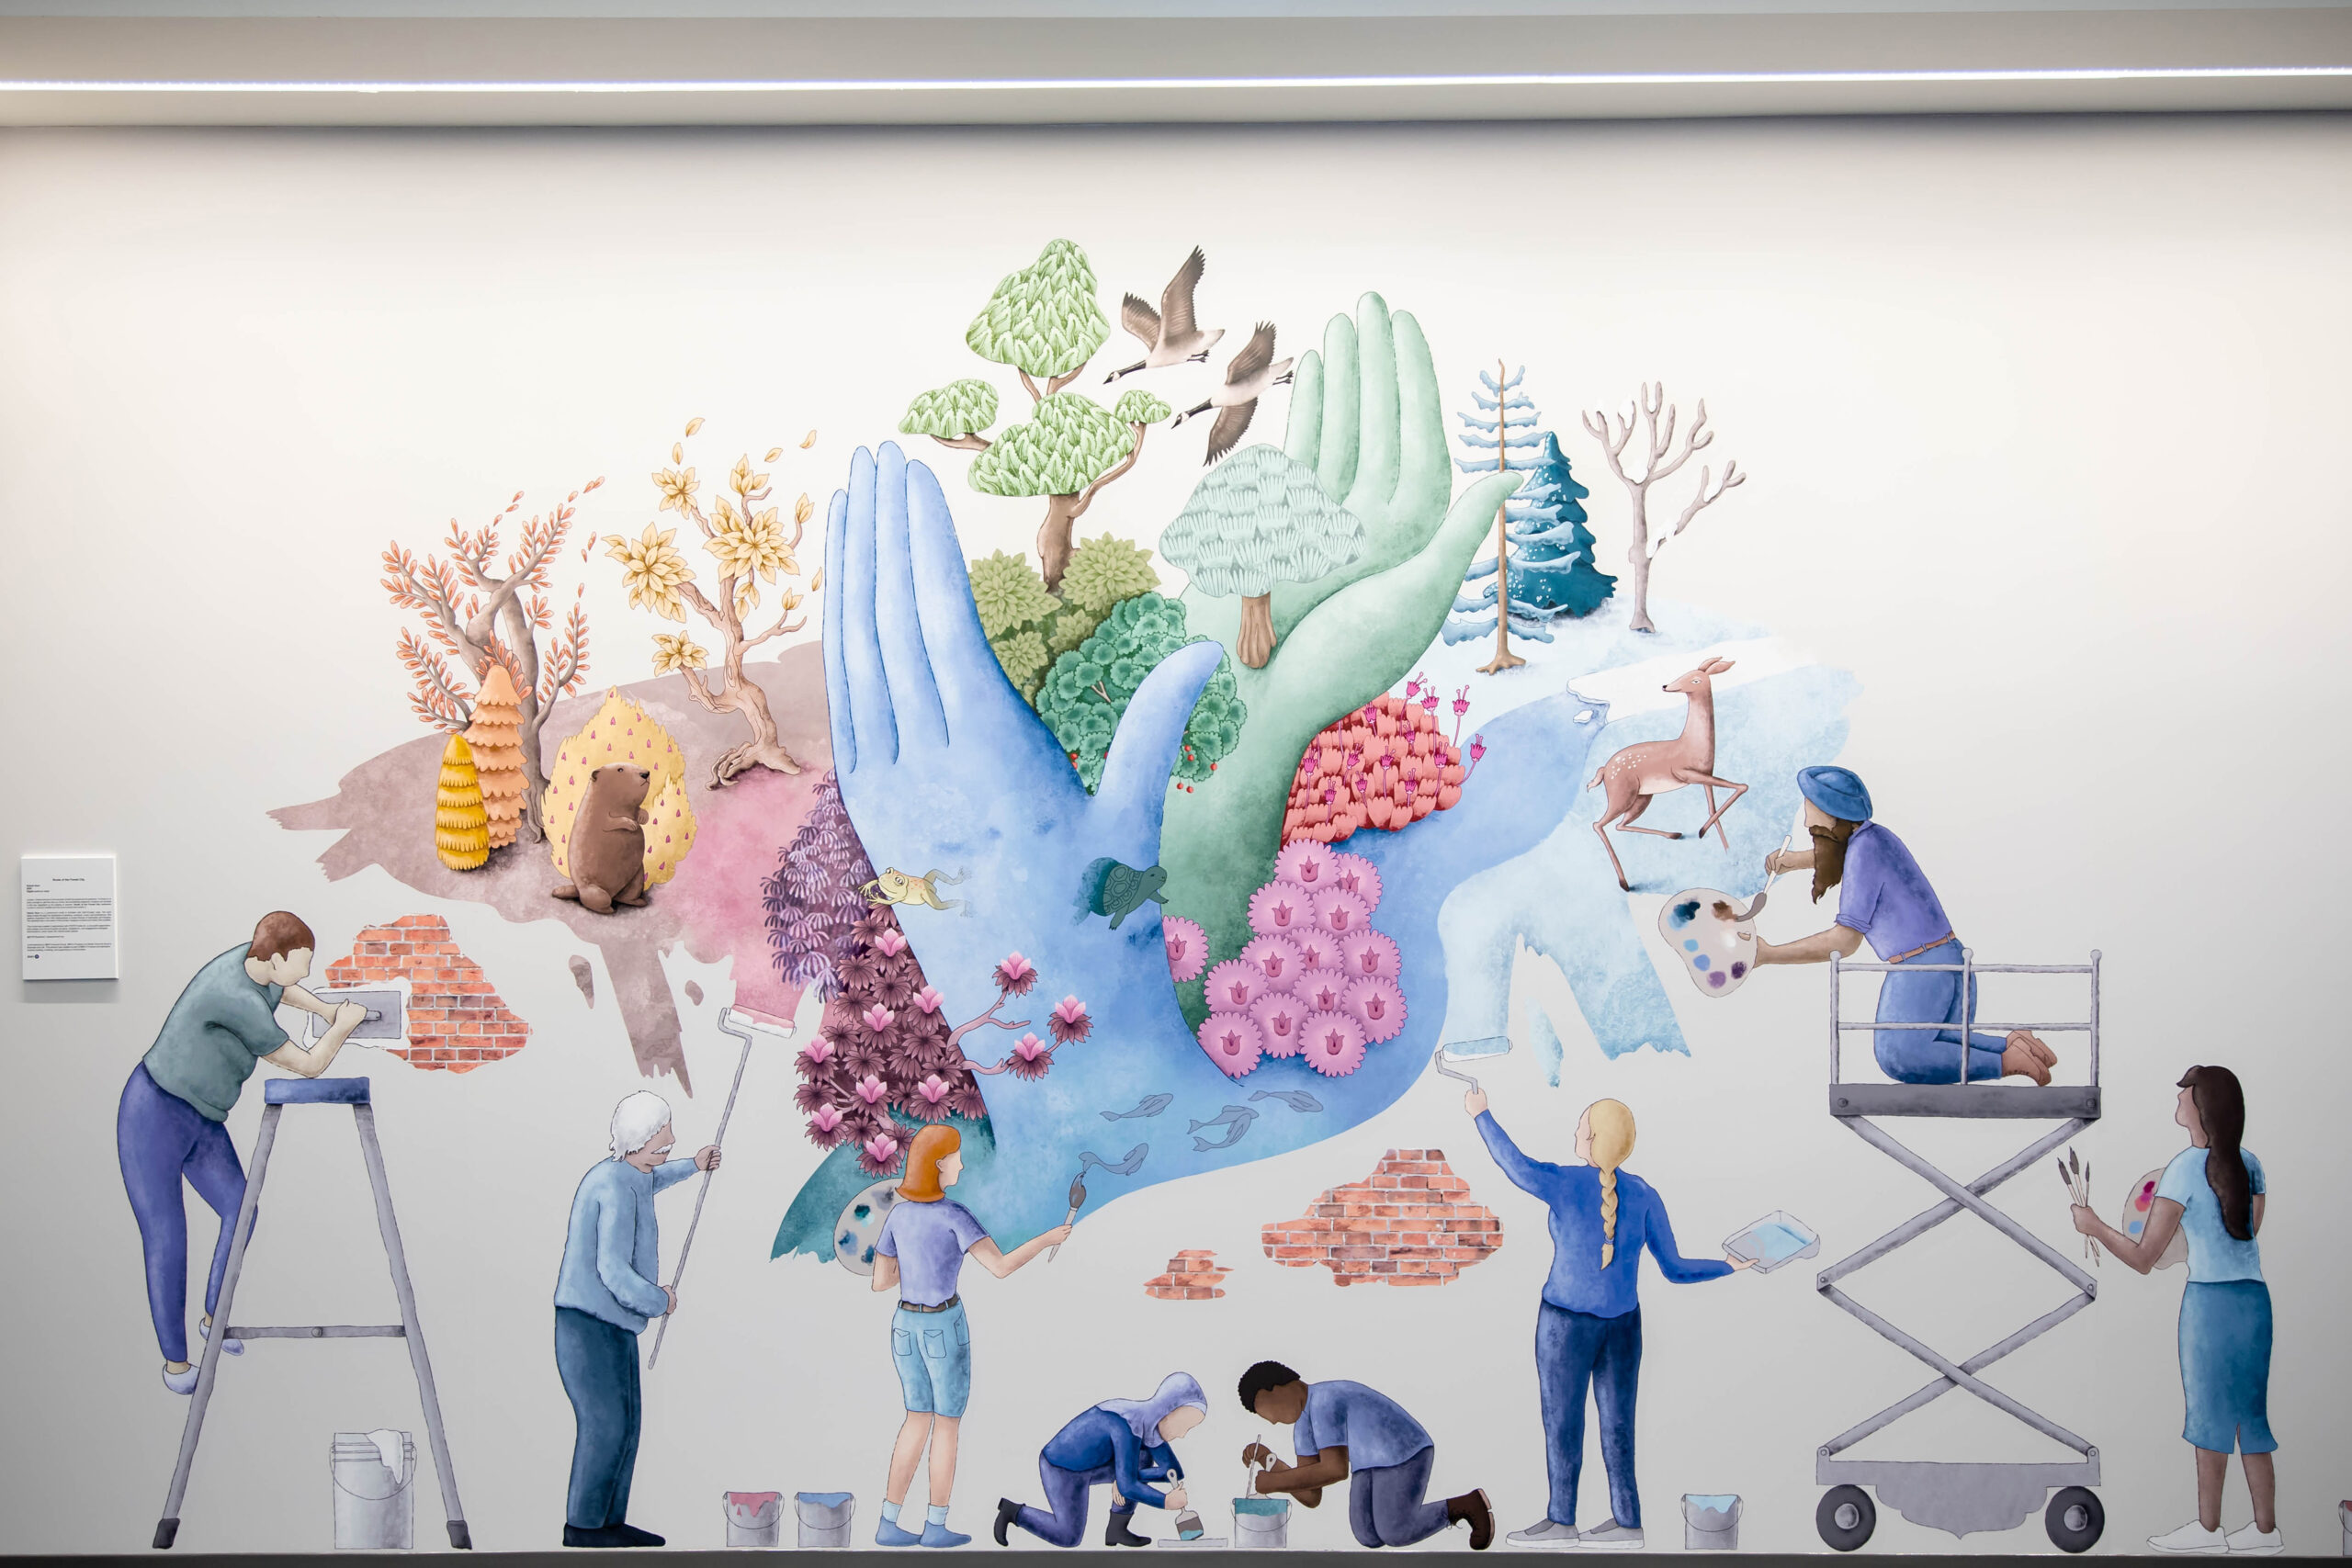 A completed mural by Keerat Kaur in pastel colours and illustrations of hands and people building and growing fruits.